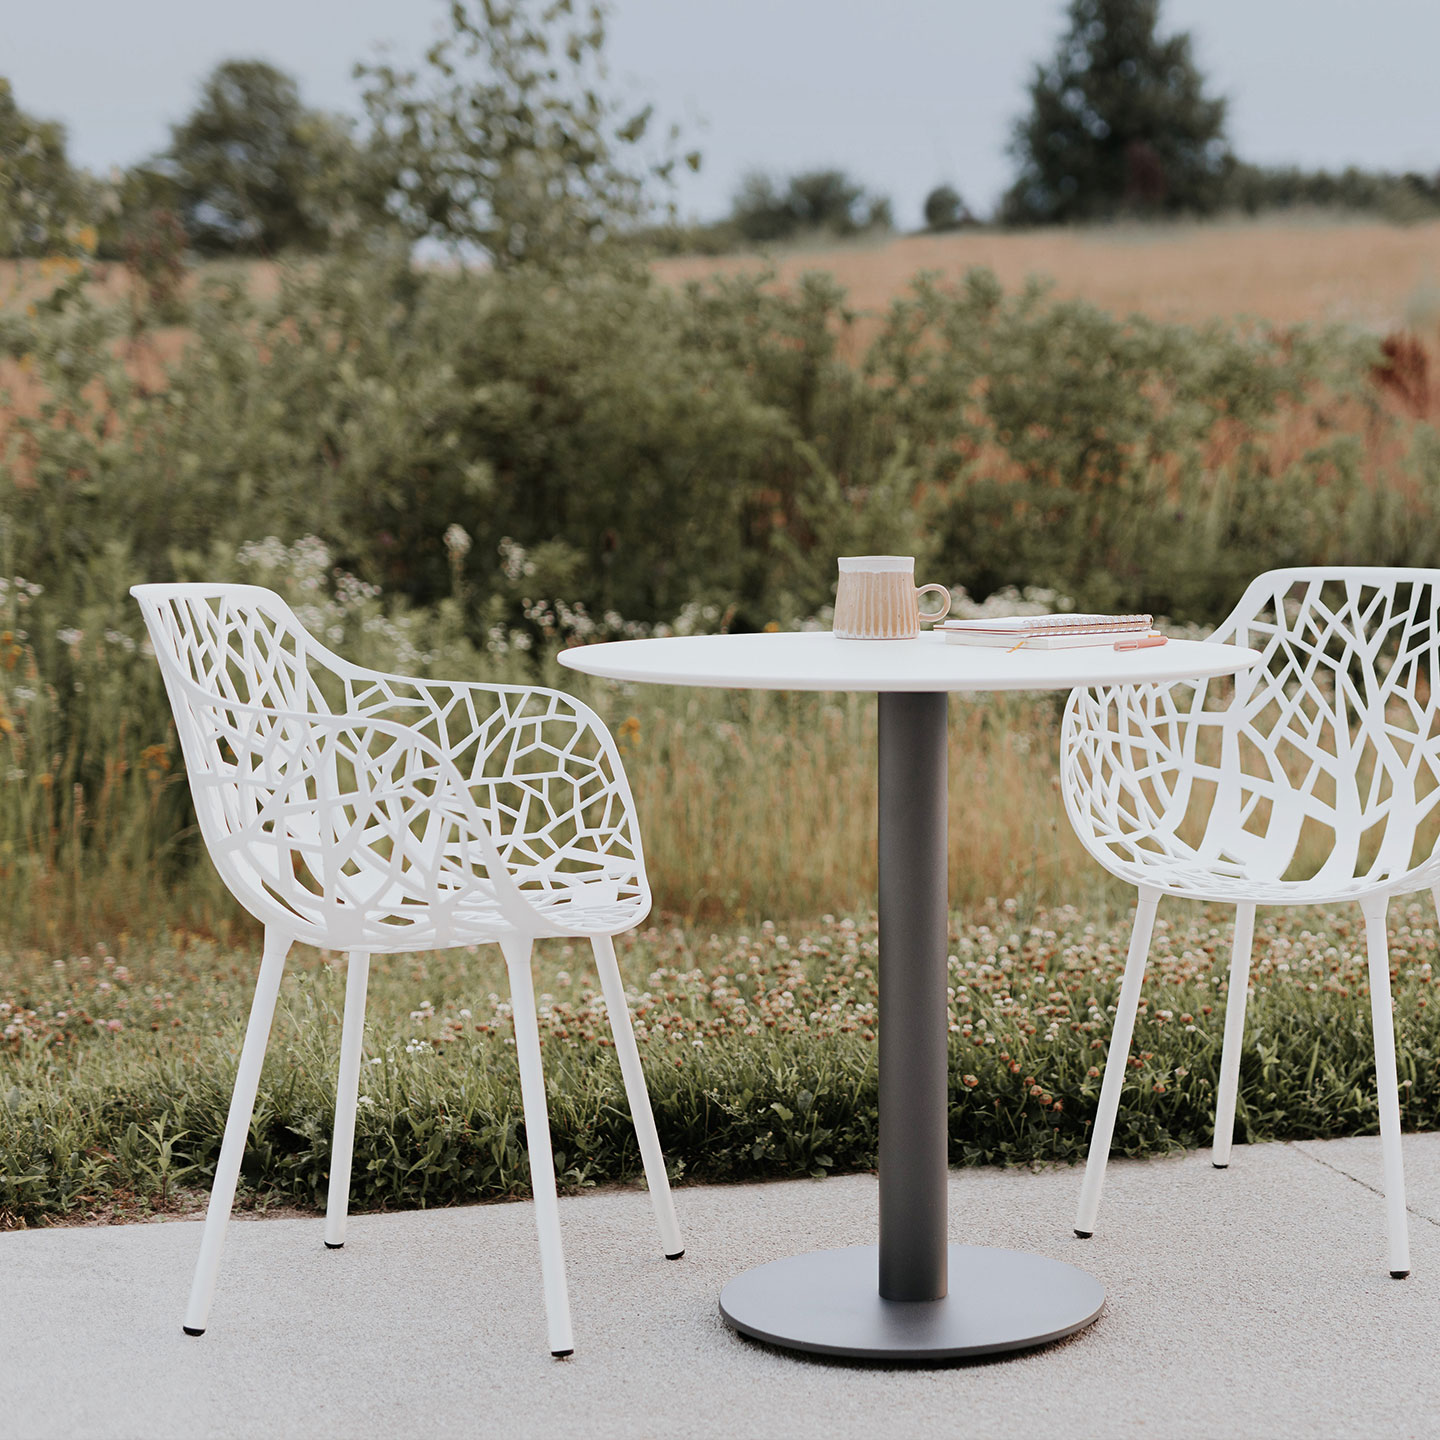 Haworth Janus Cafe Table in white laminate in outdoor patio seating in a coffee table conversation set up